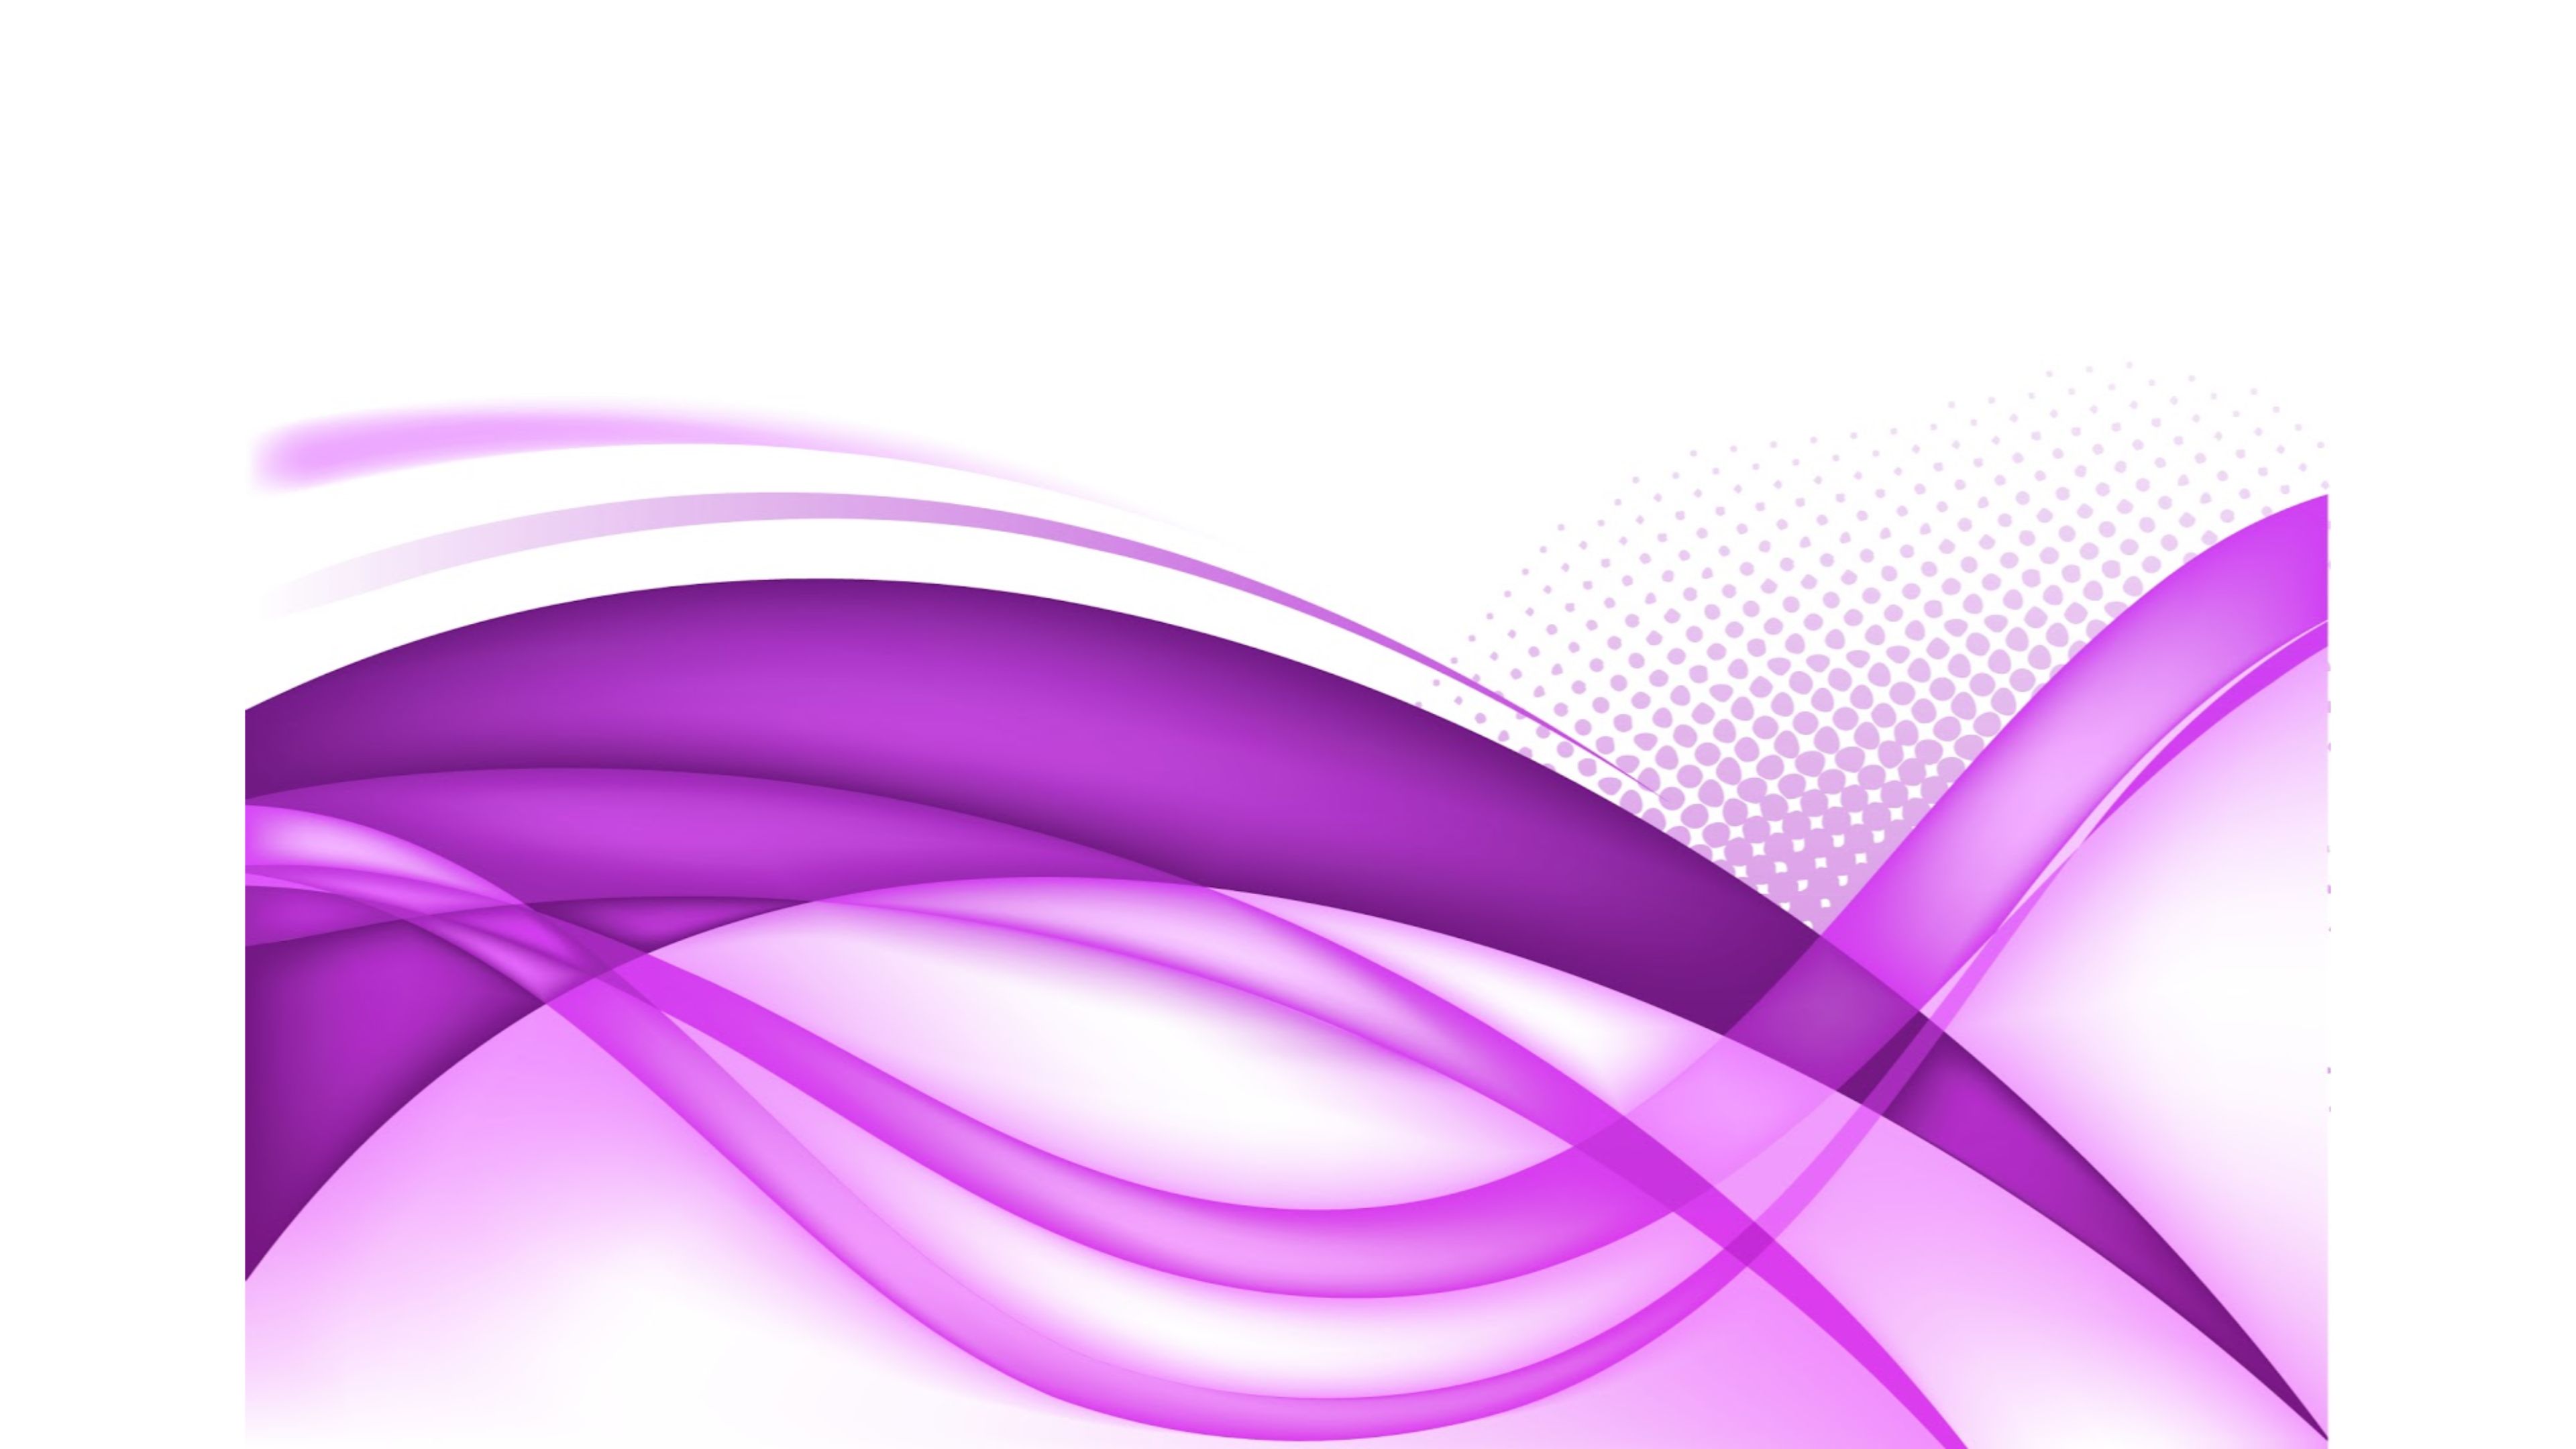 purple wallpapers, photos and desktop backgrounds up to 8K [7680x4320] resolution